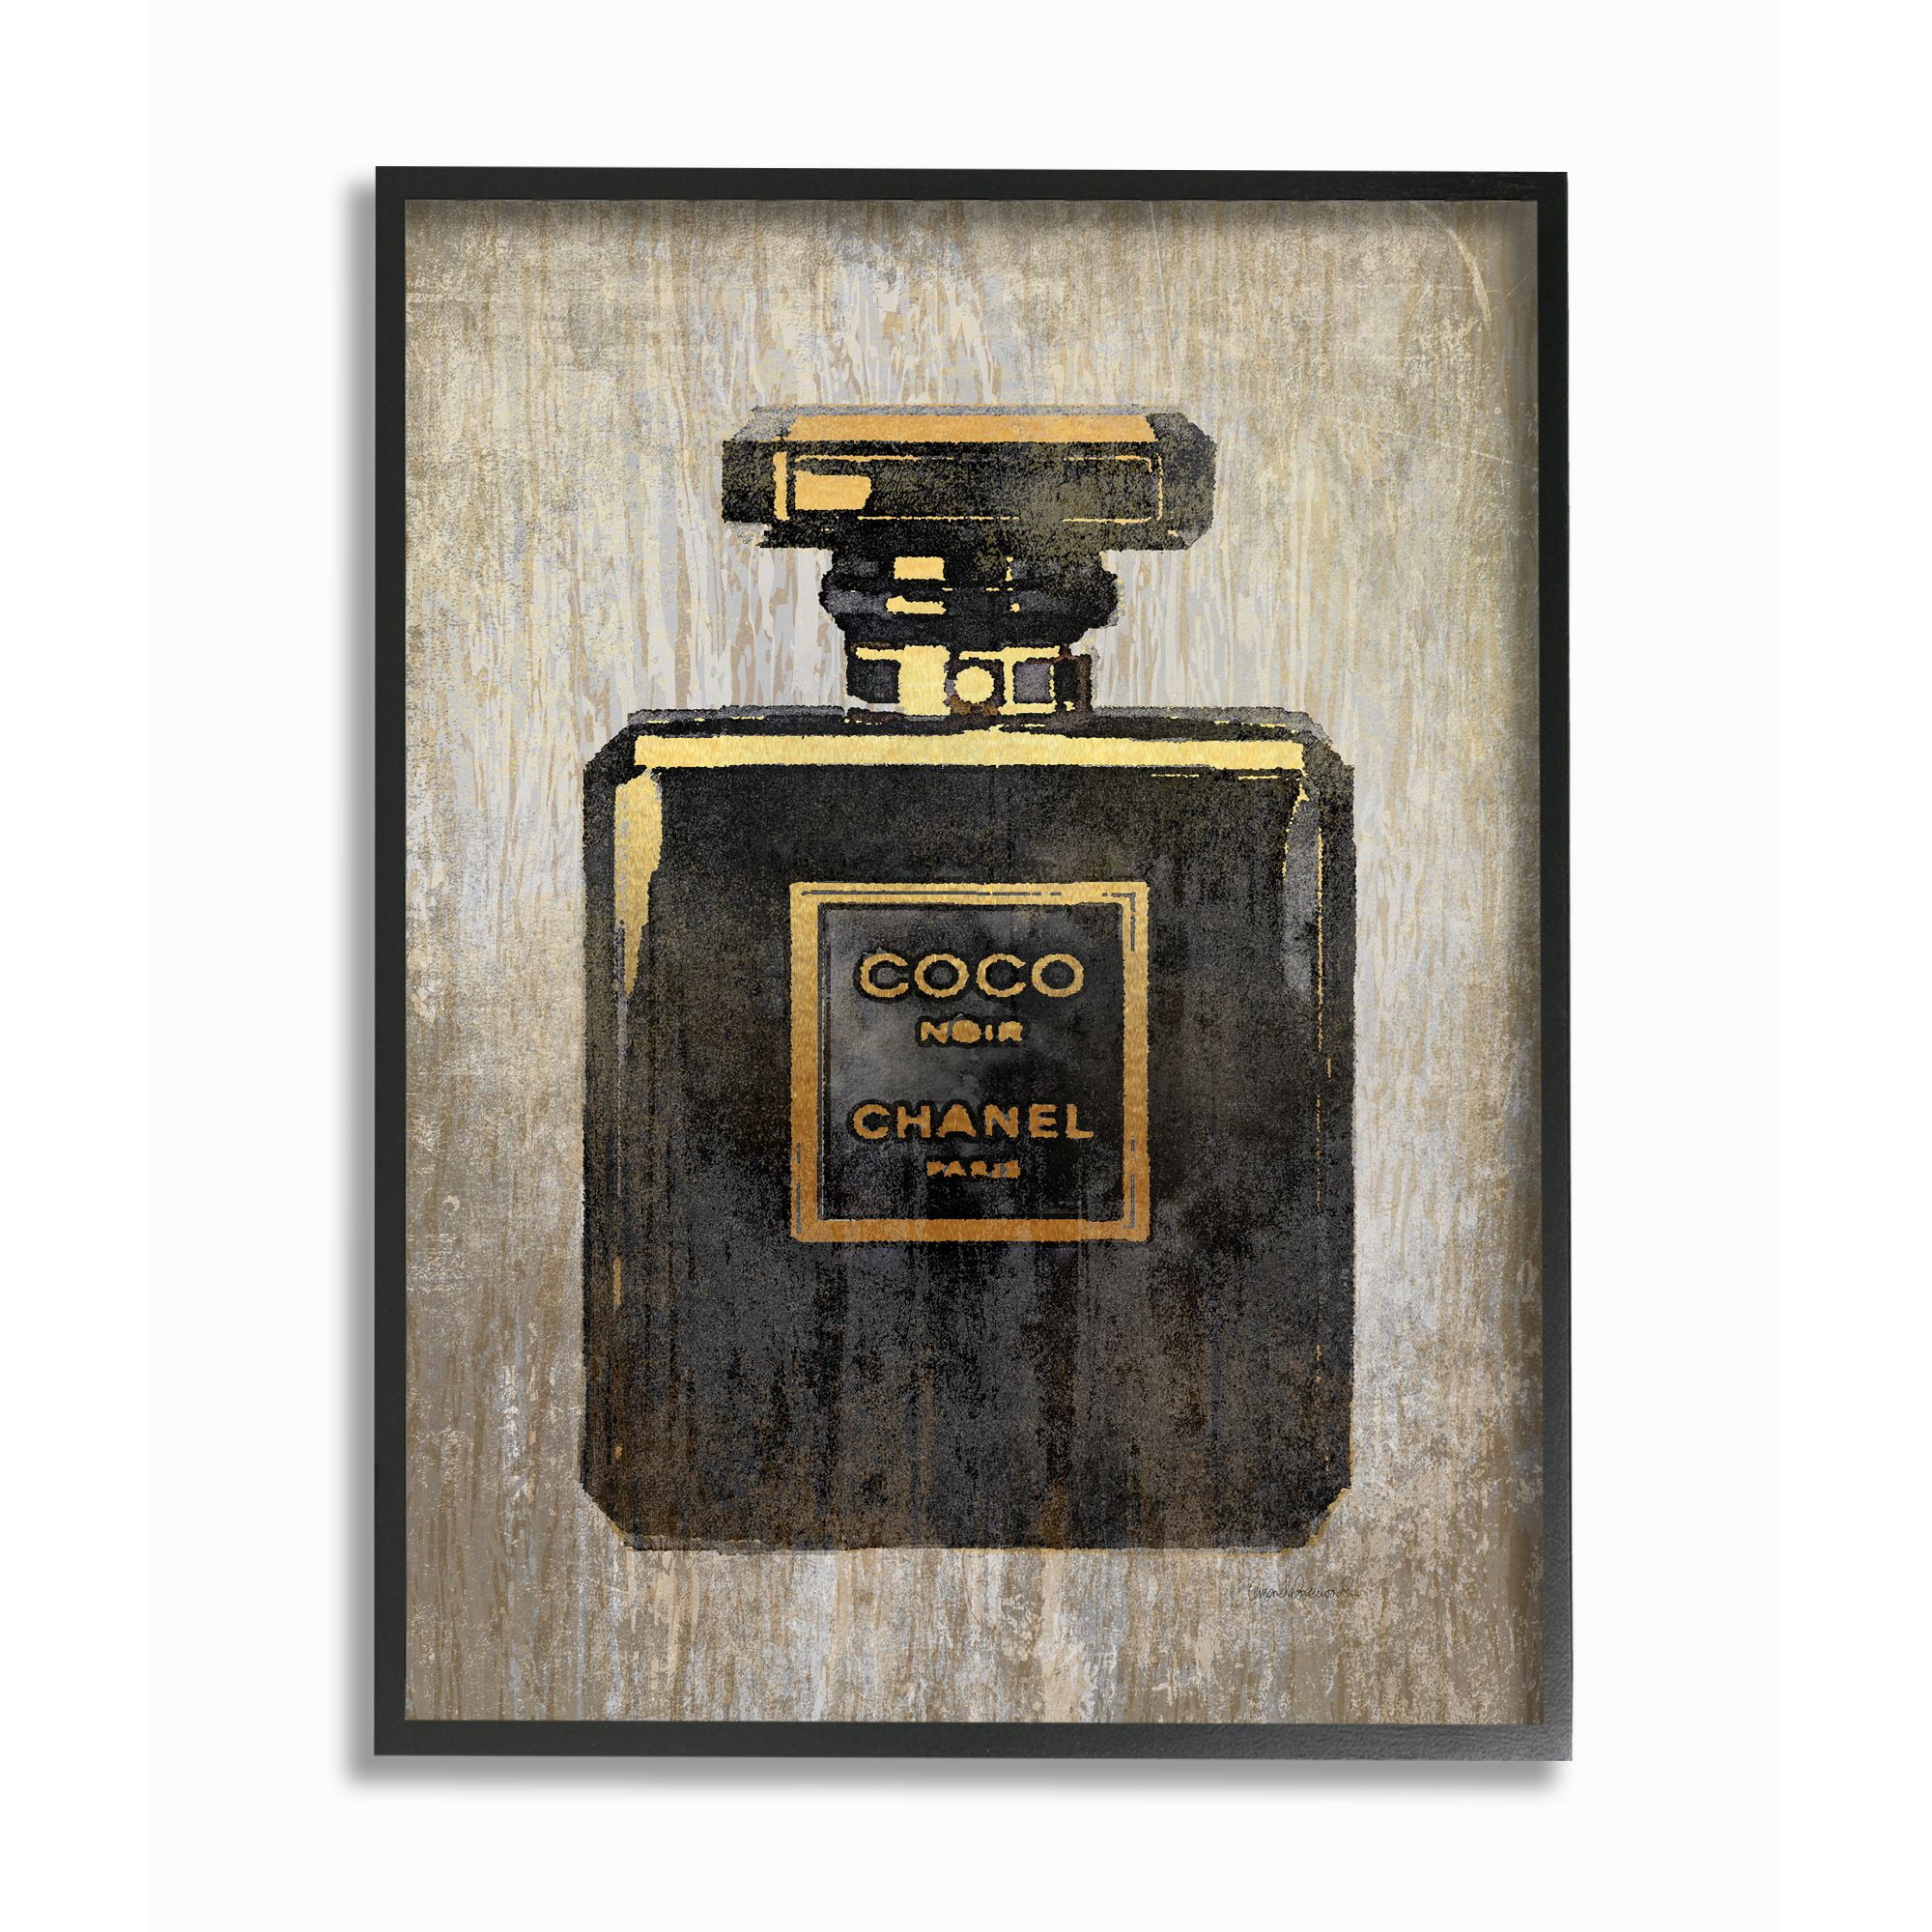 Stupell Industries Fashion Designer Perfume Black Gold Textured Watercolor Framed Wall Art by Amanda Greenwood